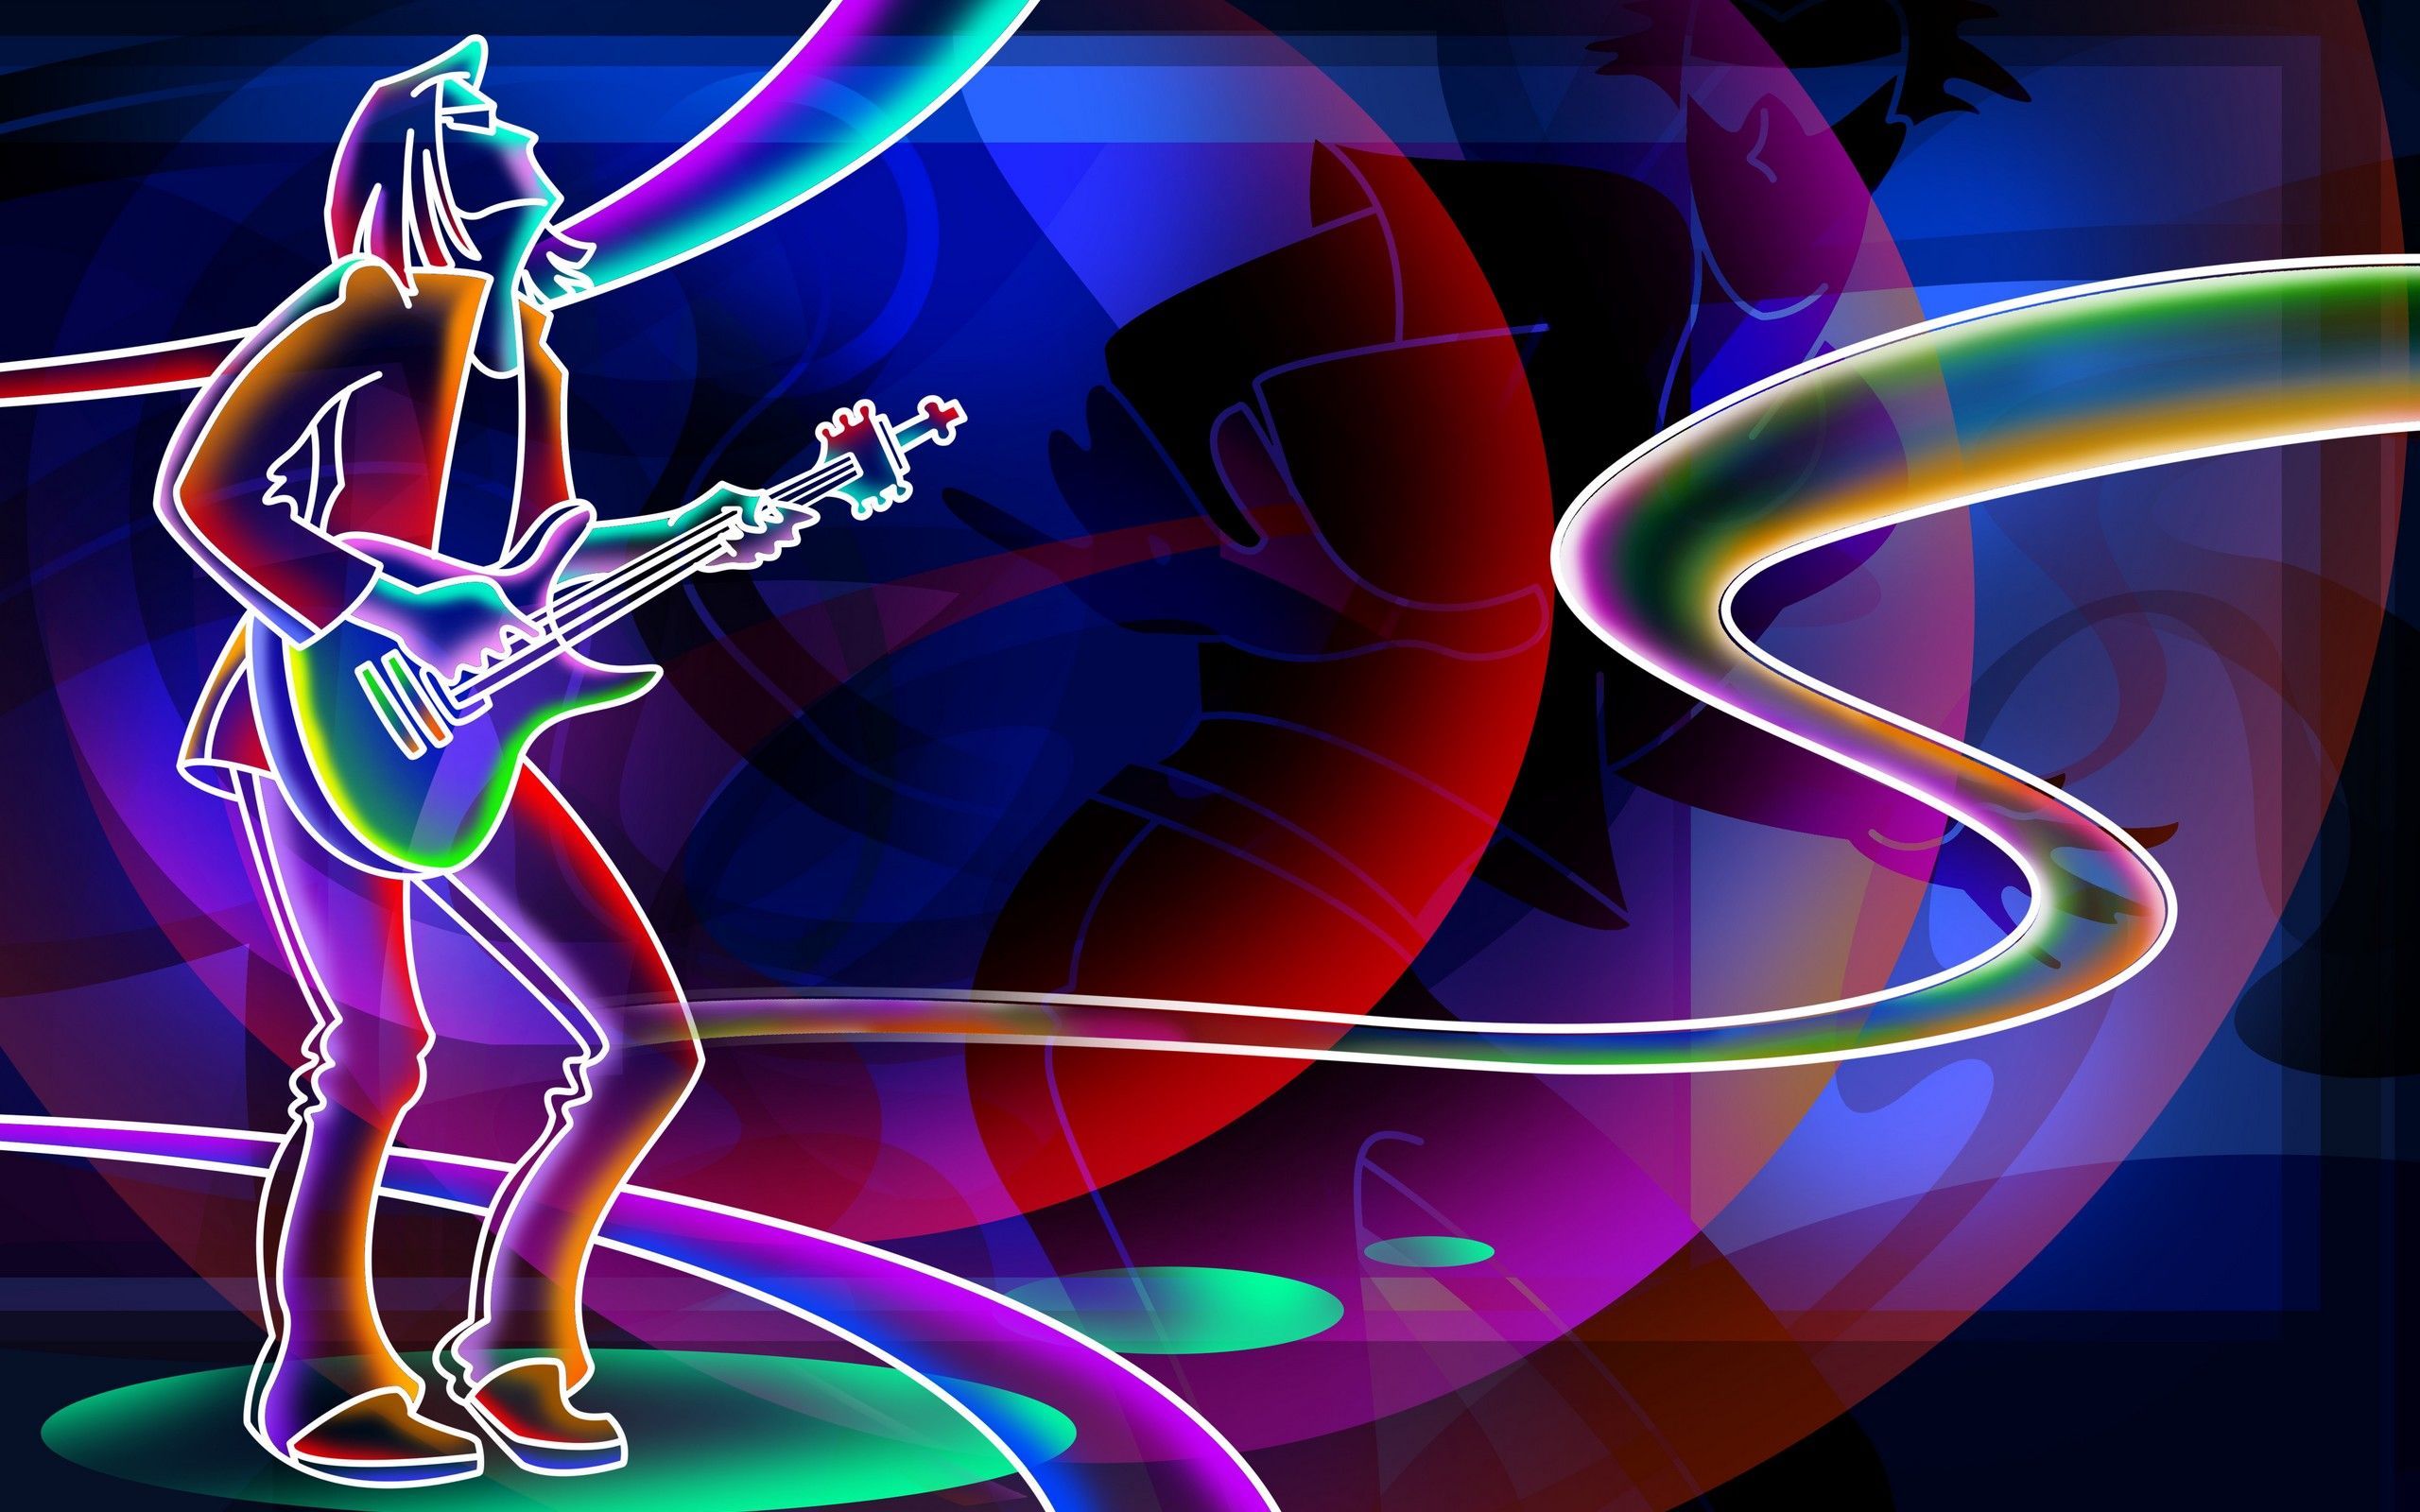 Neon wallpaper - 3D neon colorful Wallpapers - HD Wallpapers 94619